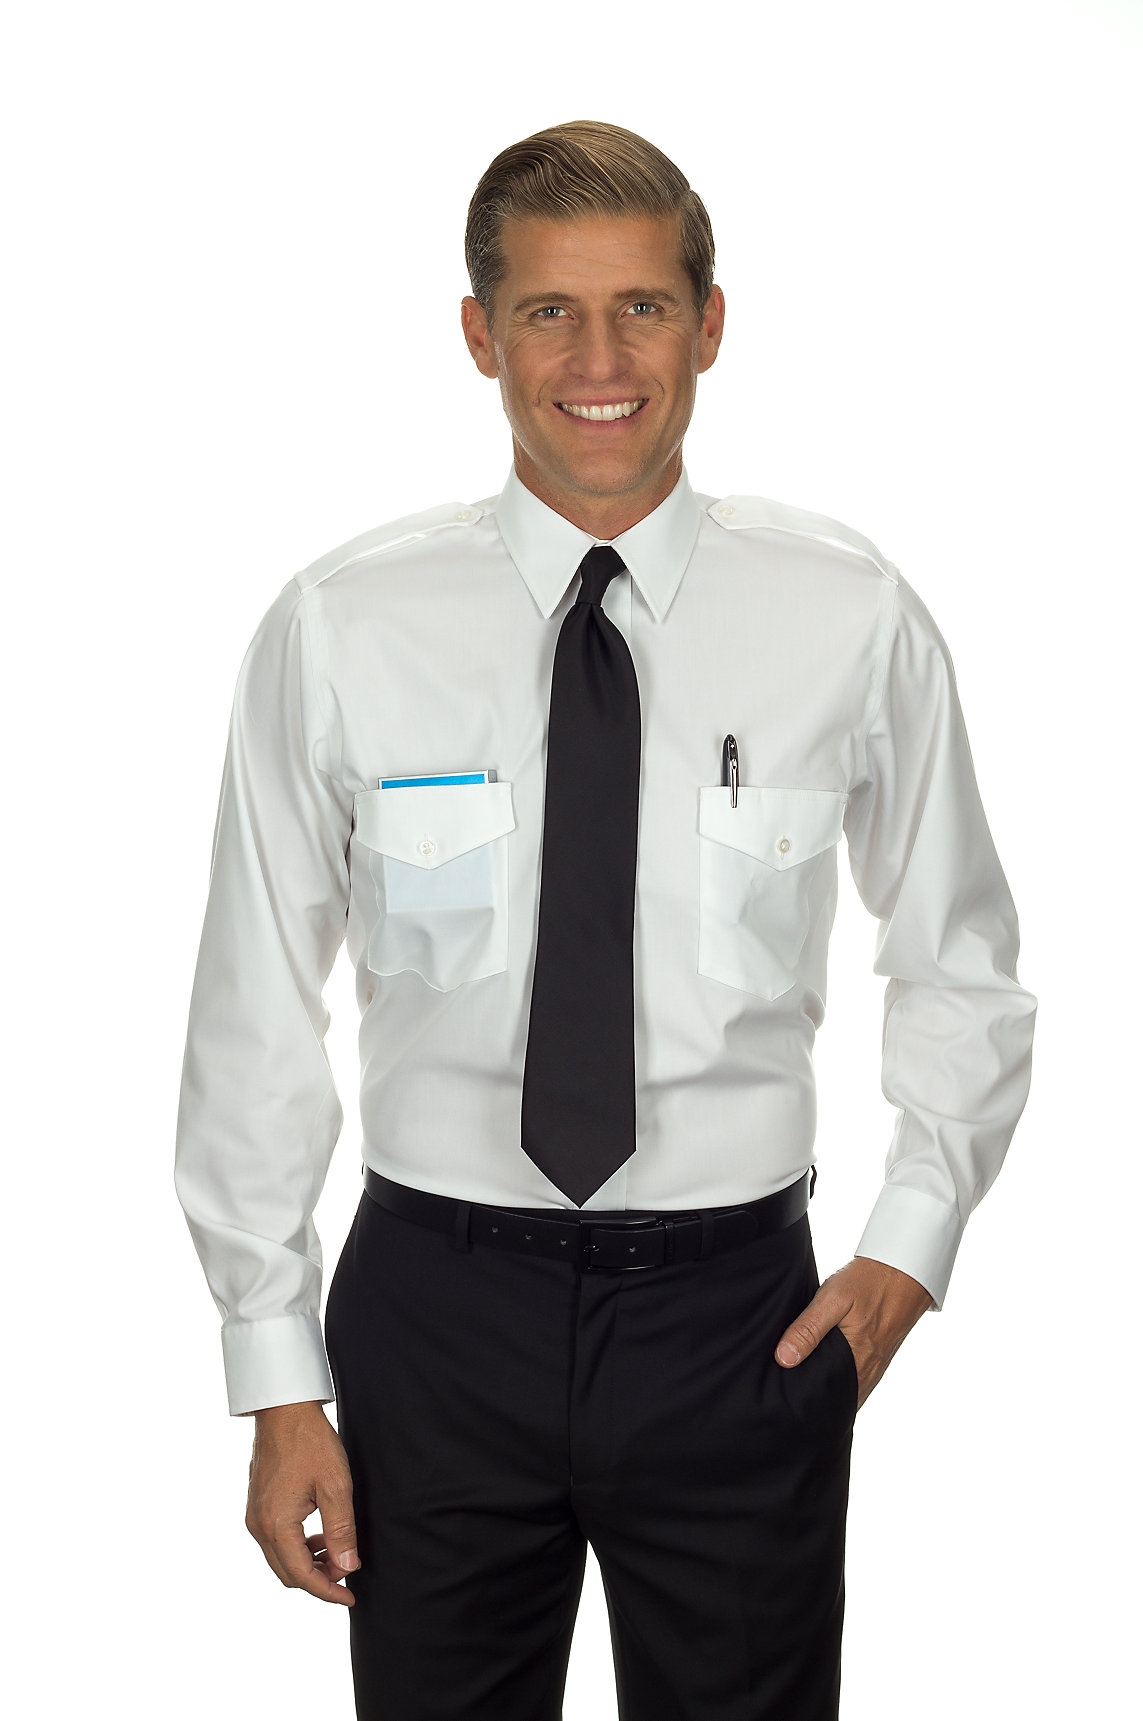 "THE COMMANDER" STYLE SHIRT by Van Heusen - Regular or Tallman Fits, Short/Long Sleeve, White Only-239